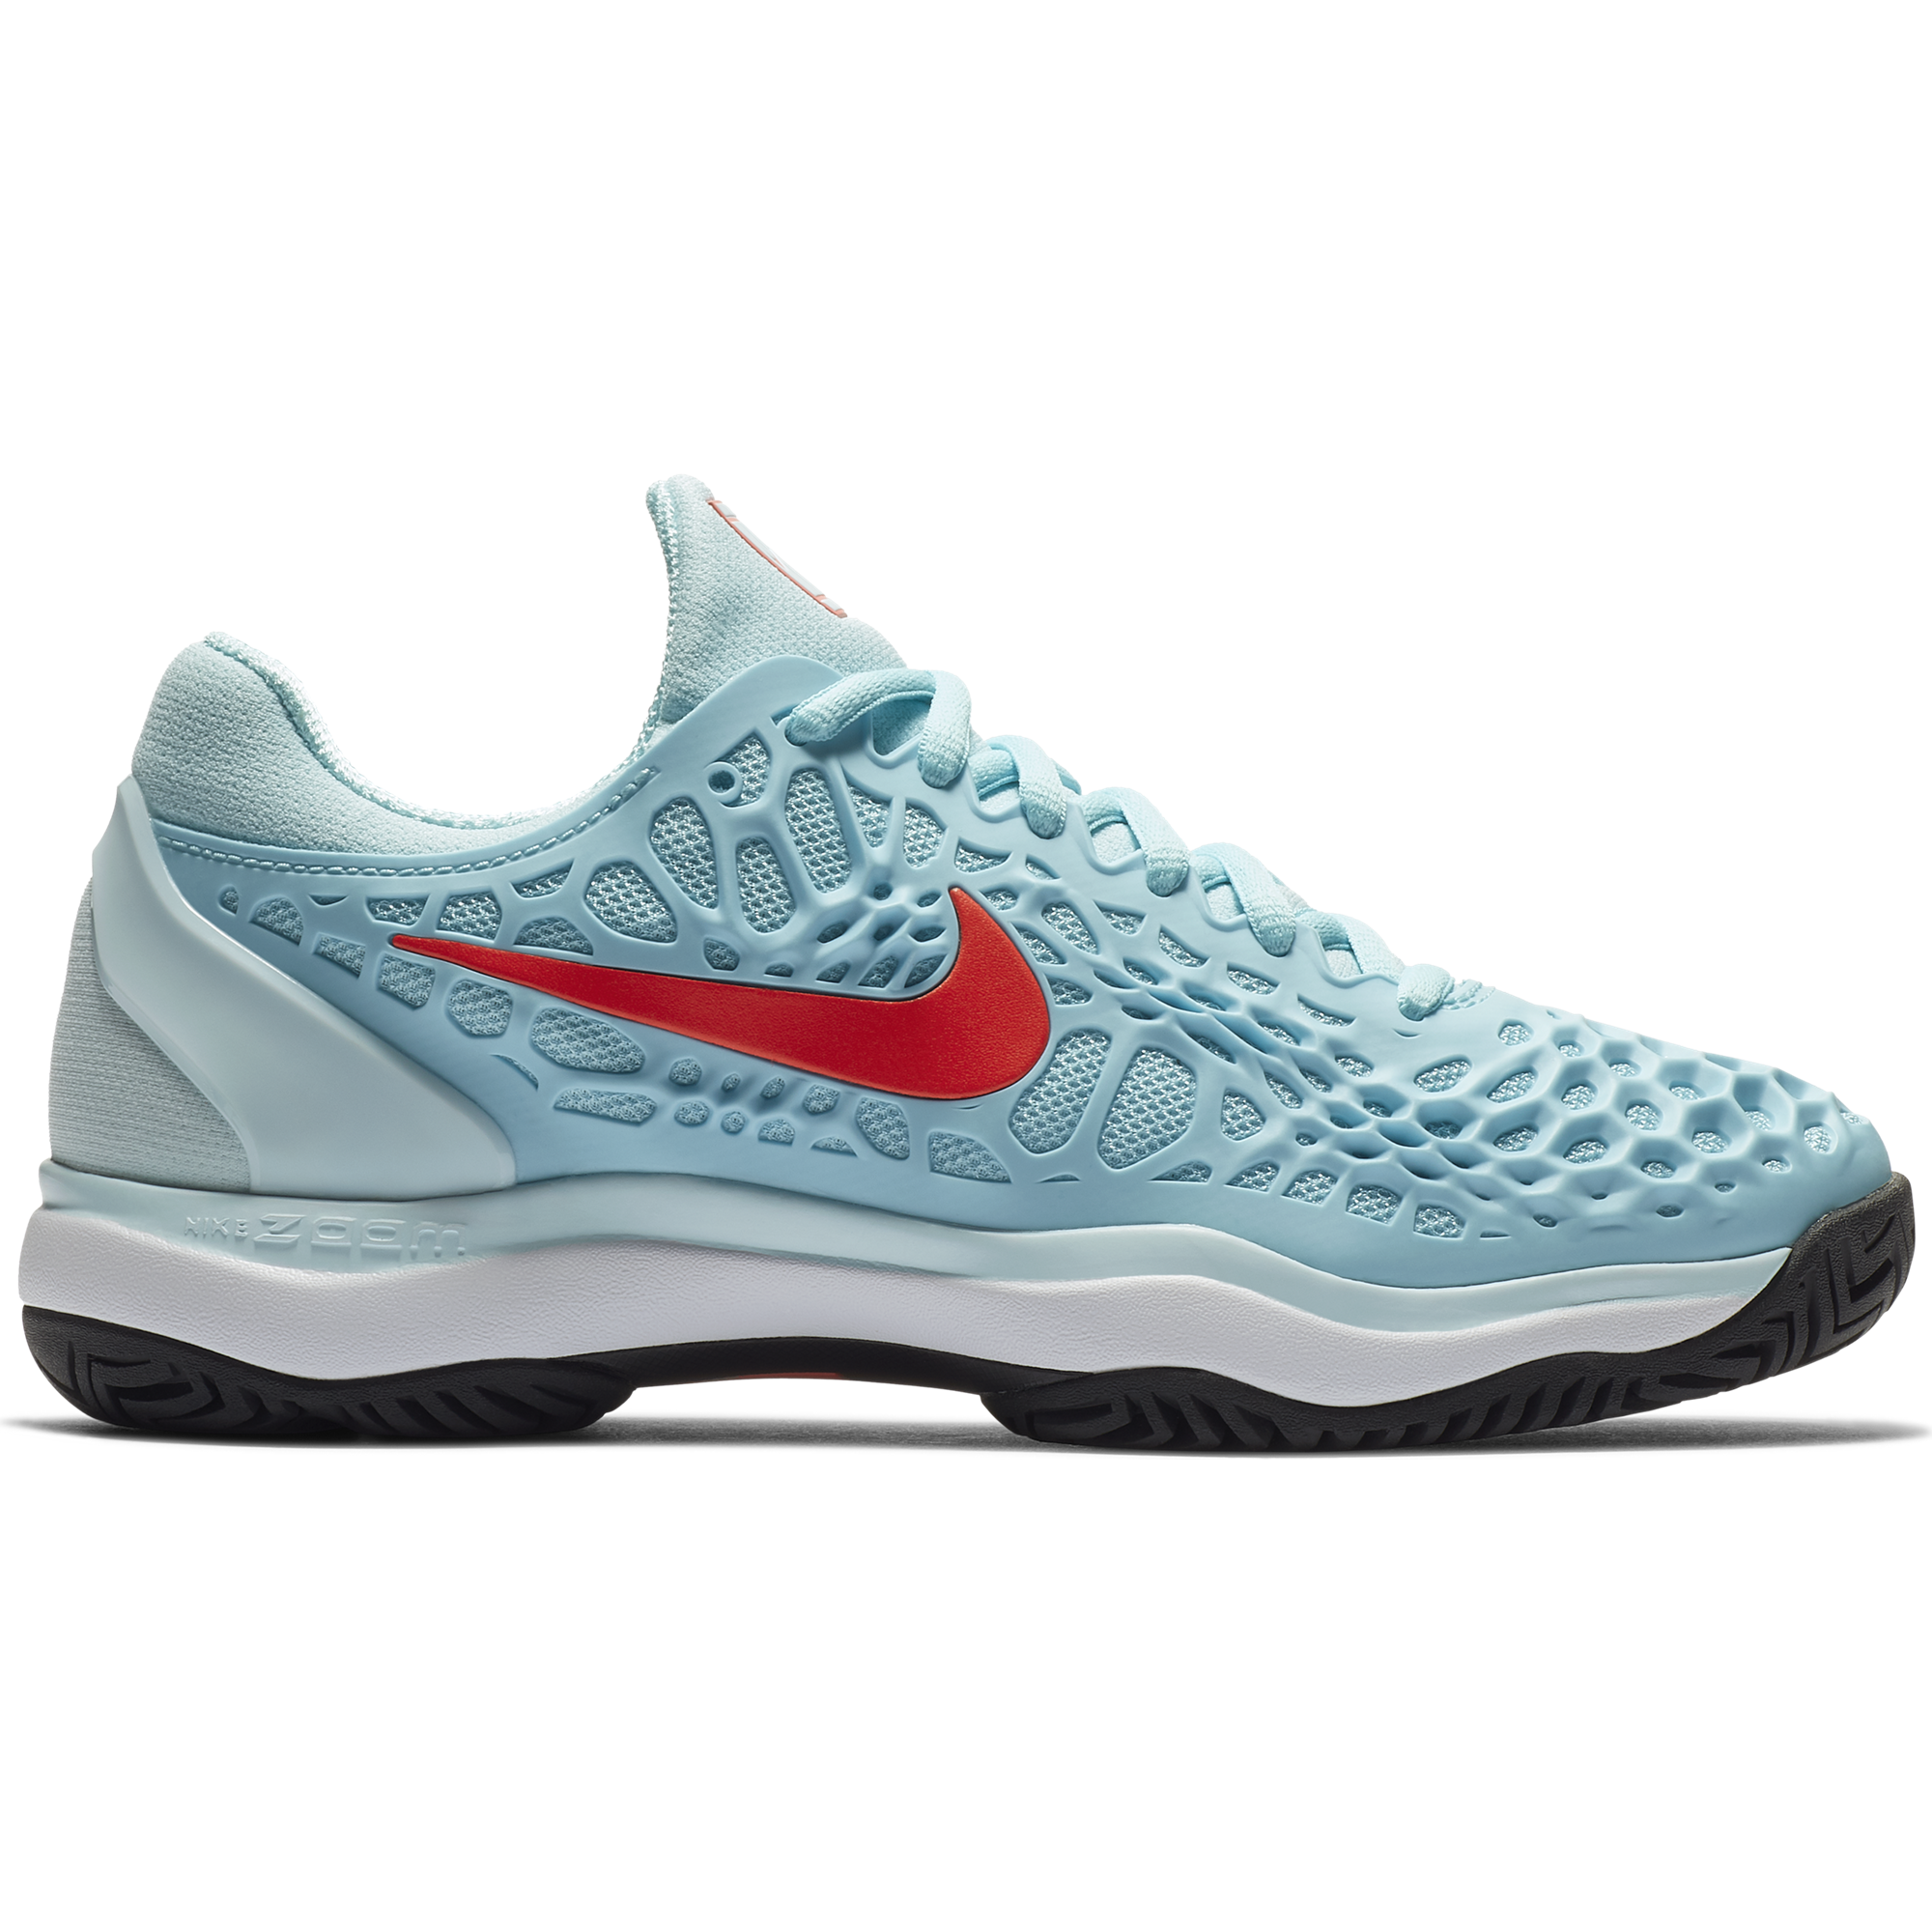 nike court zoom cage 3 womens